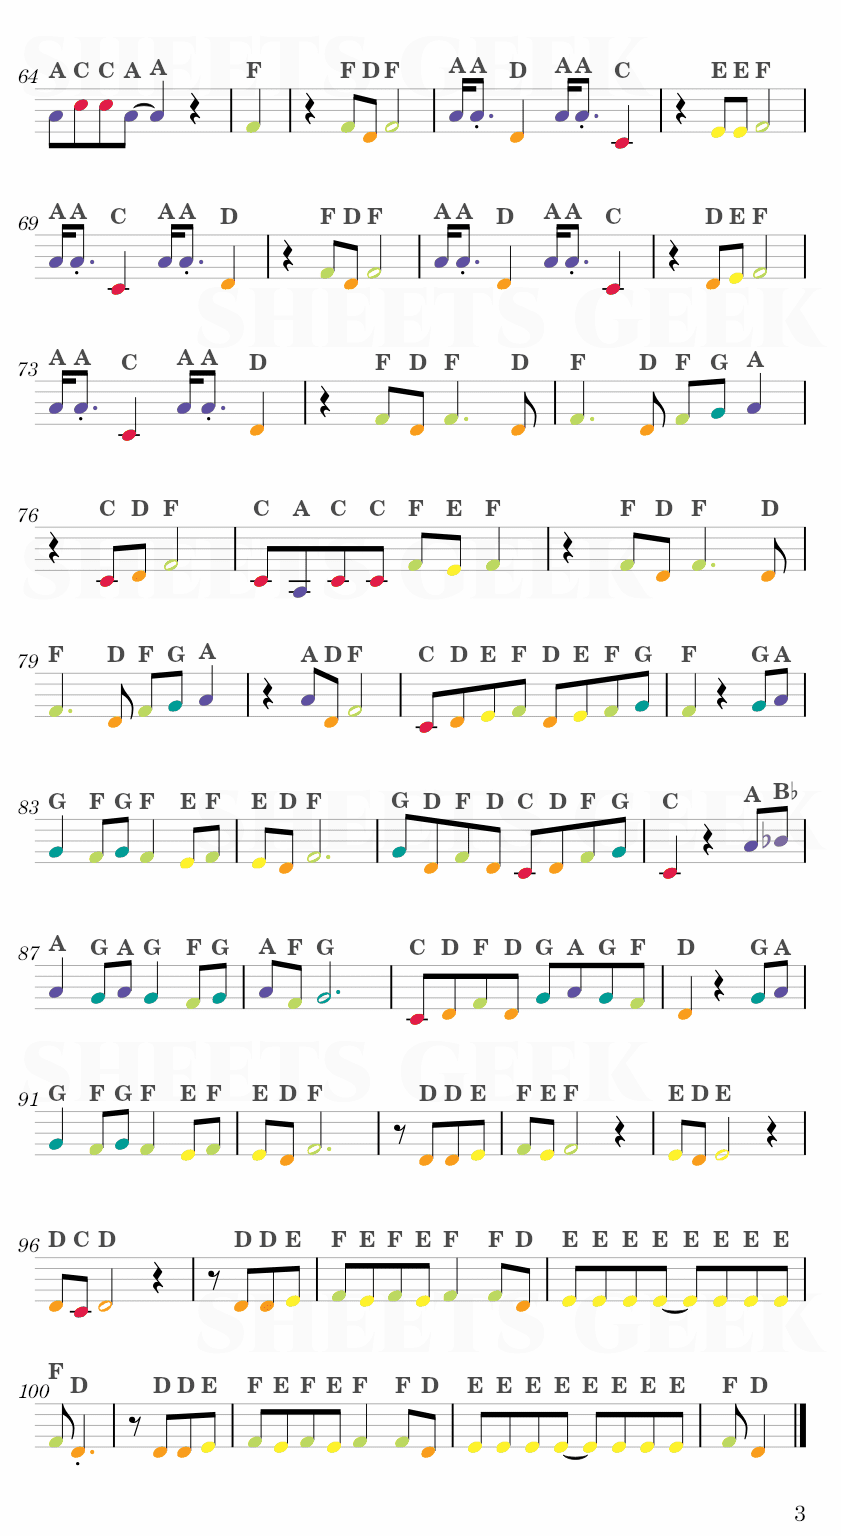 FAKE LOVE - BTS Easy Sheet Music Free for piano, keyboard, flute, violin, sax, cello page 3